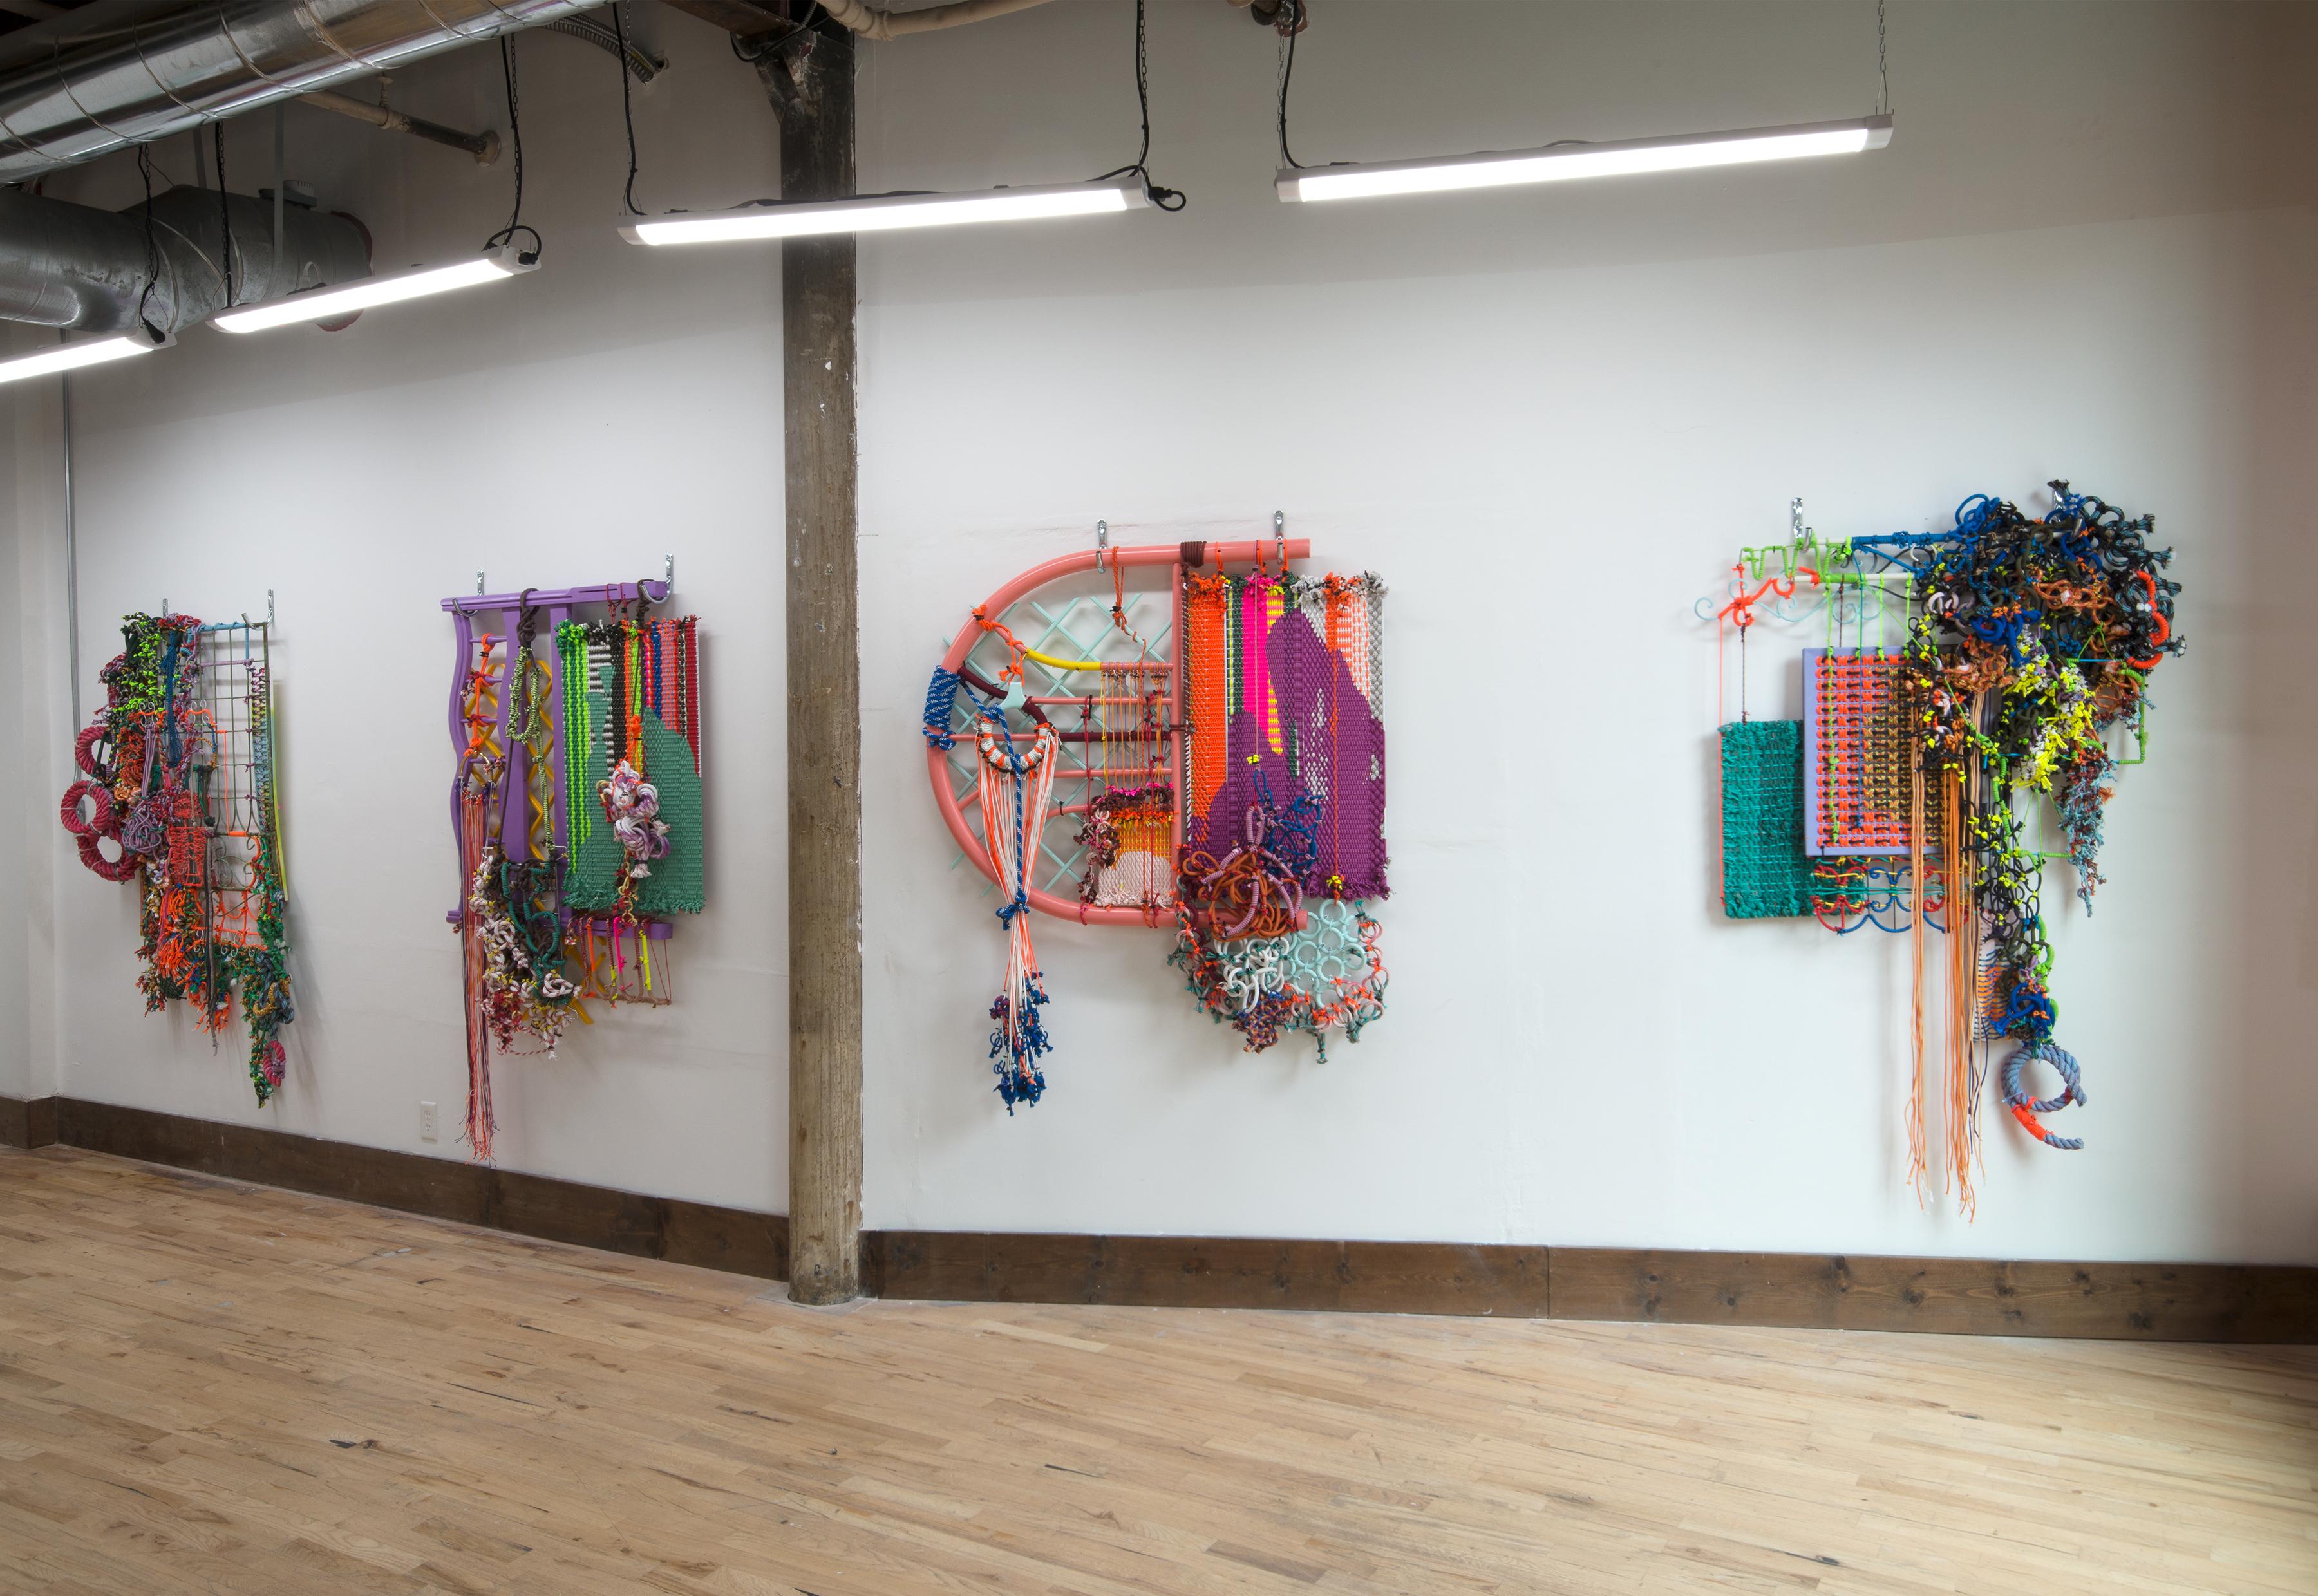 In ARCHITECTURAL HYPERBOLE 02, Liz Miller creates a sculptural wall hanging piece which builds on the juxtapositions between strength and malleability, architecture and fiber, structure and knots. Building with rope onto a repurposed, highly